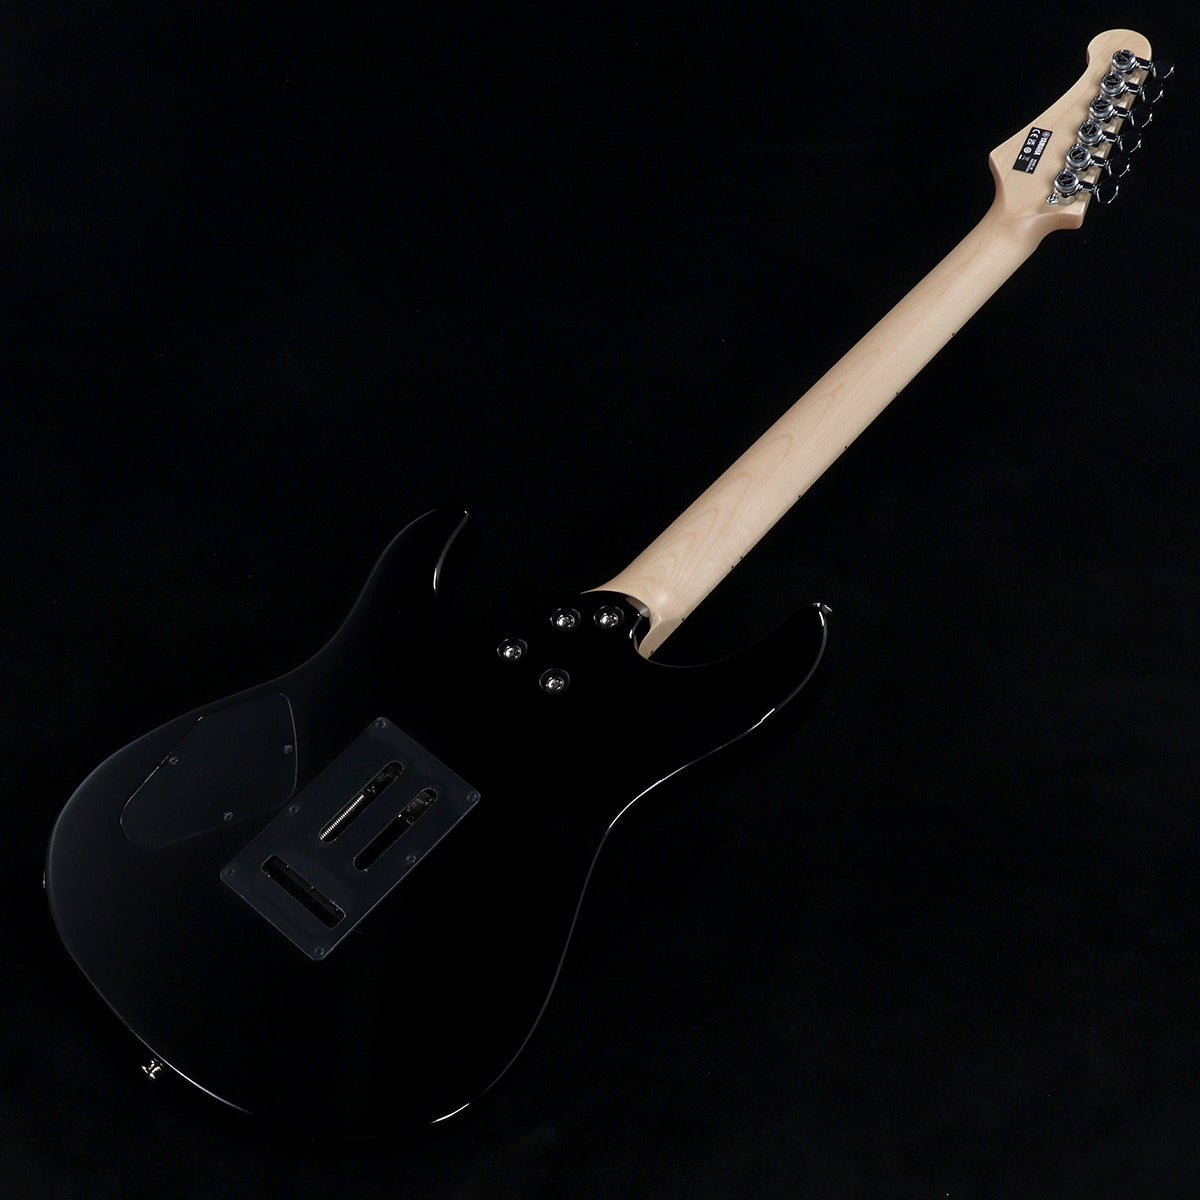 [SN IJX253412] YAMAHA / Pacifica Standard Plus - PACS+12MBL Black Maple Fingerboard(Weight:3.63kg) [05]